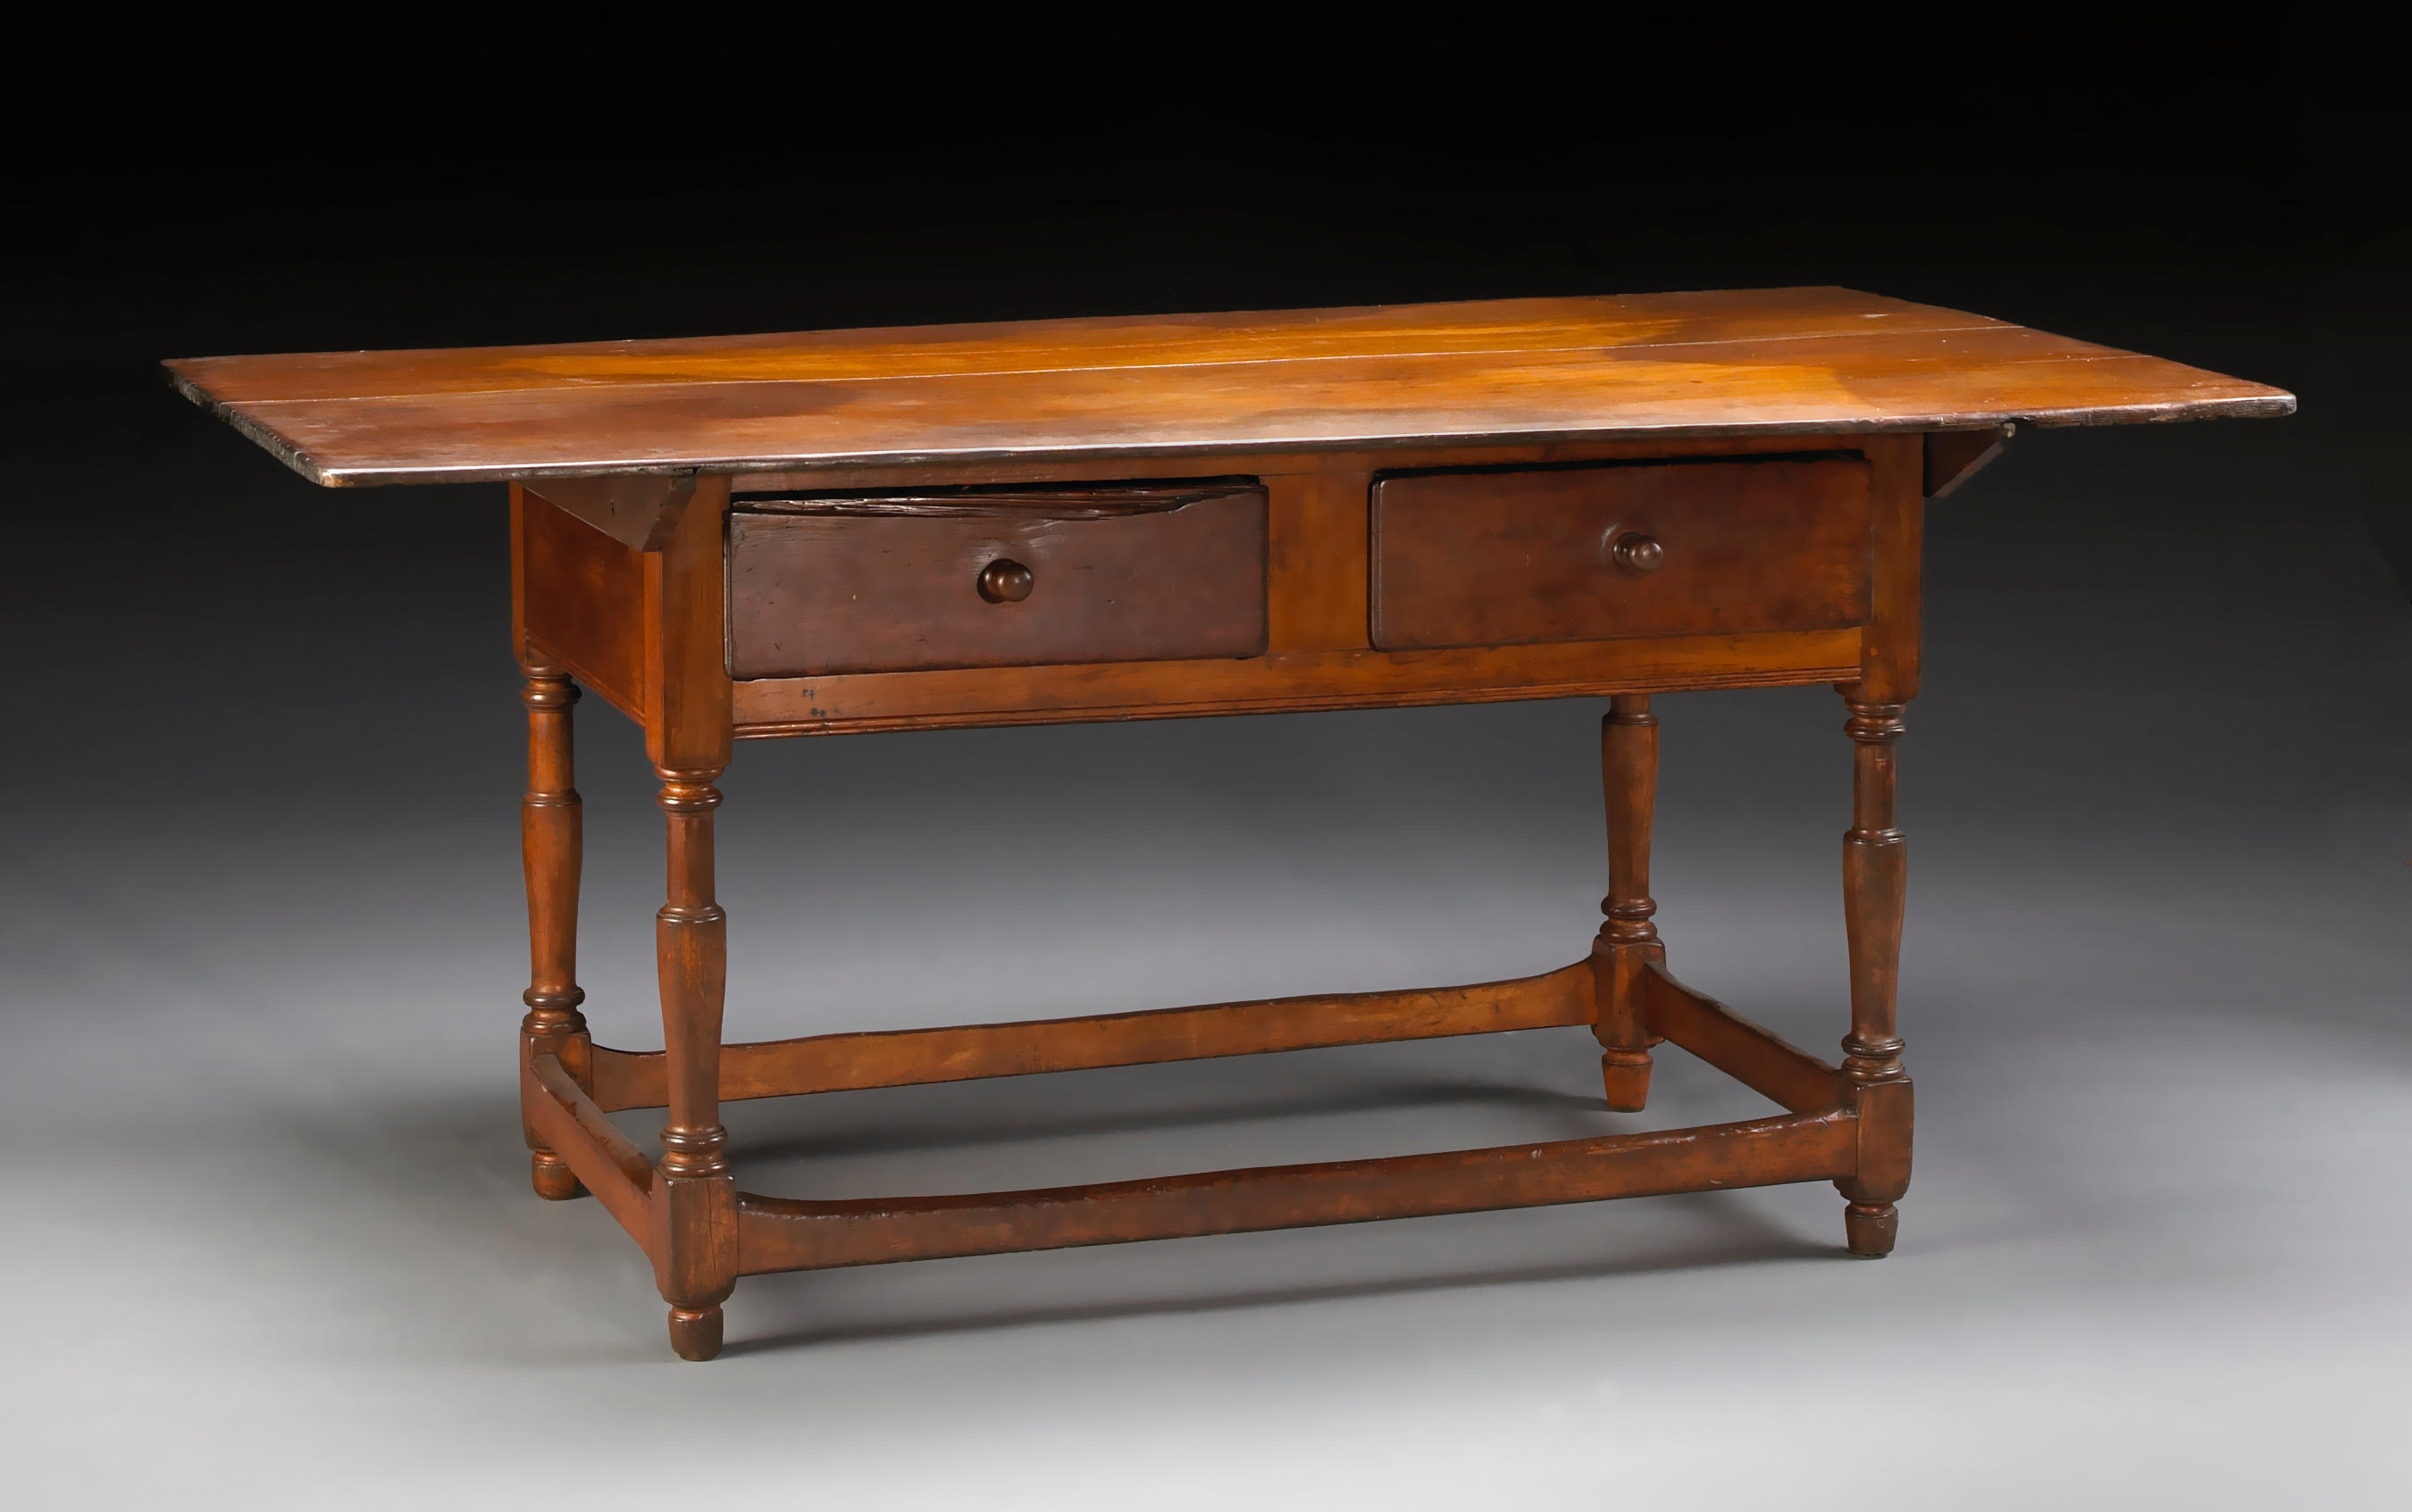 A Queen Anne maple and pine tavern table